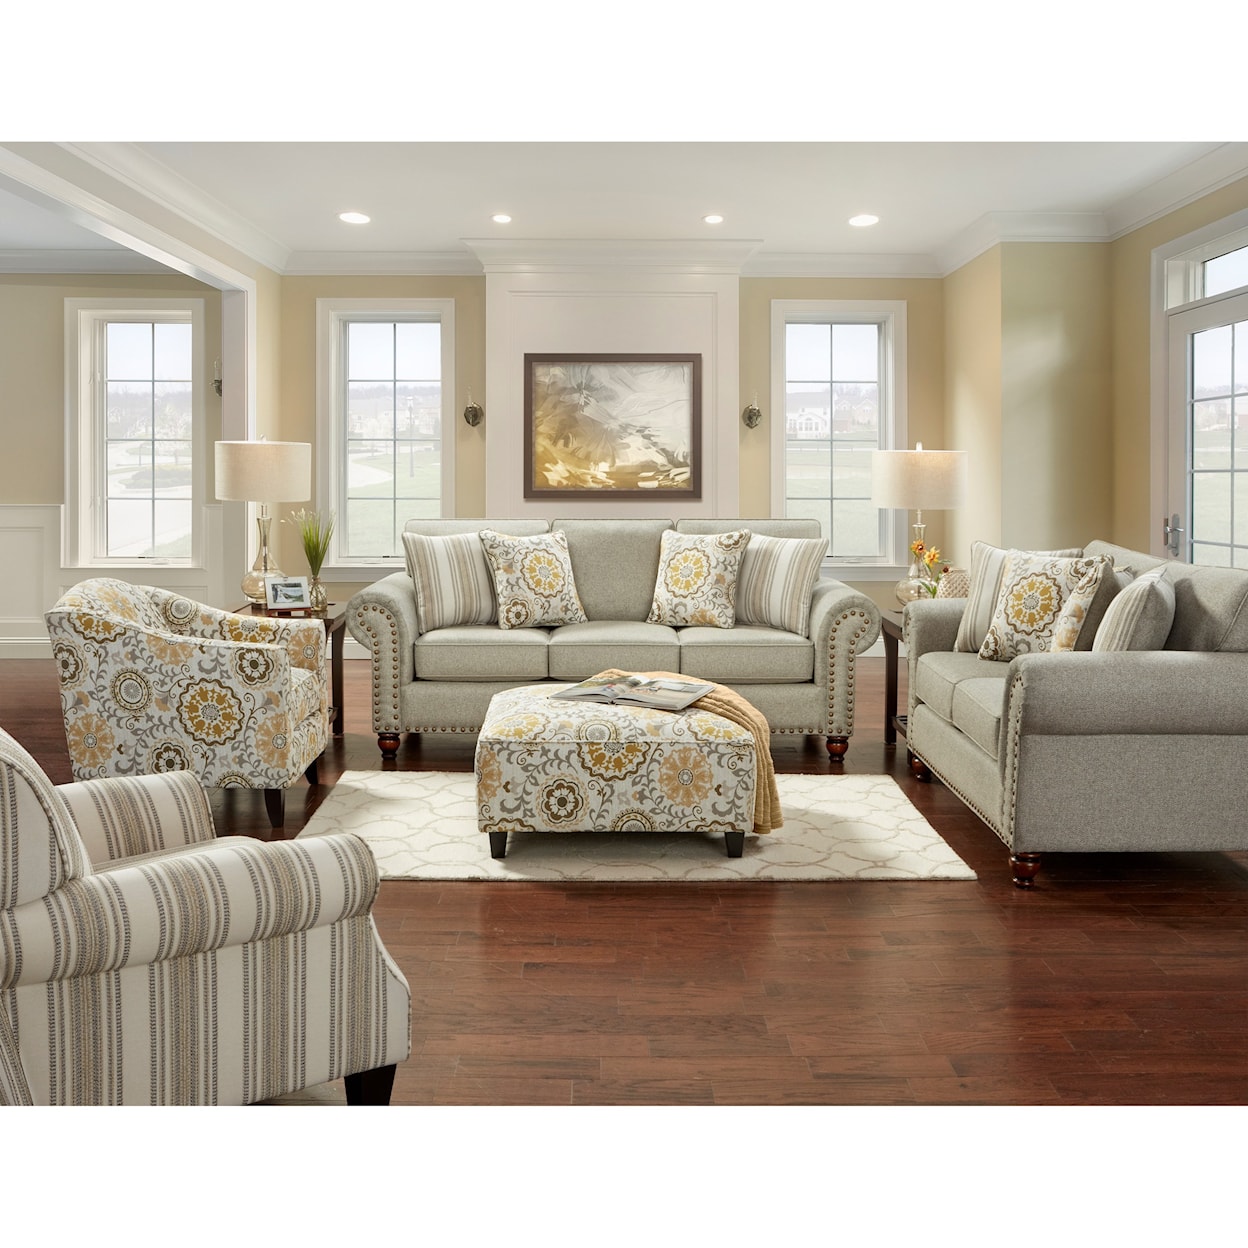 Fusion Furniture 3110 ROMERO STERLING (REVOLUTION) Stationary Living Room Group